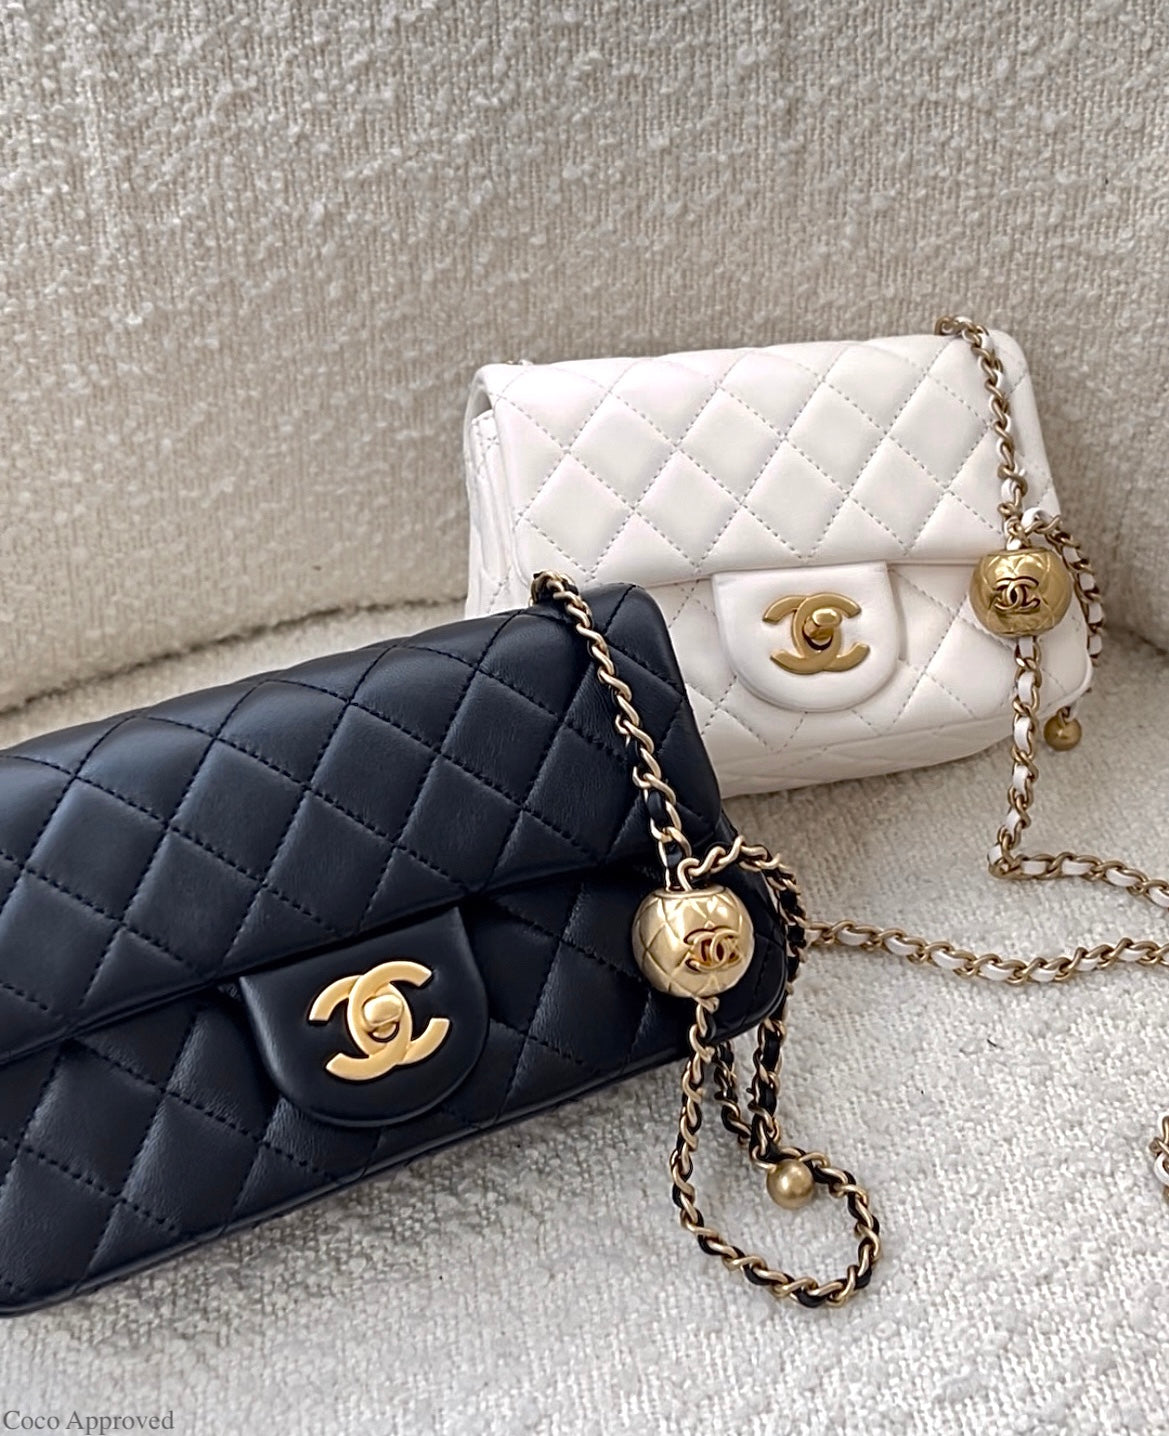 New Chanel Classic Flap With Adjustable Chain Ball for Sale in New